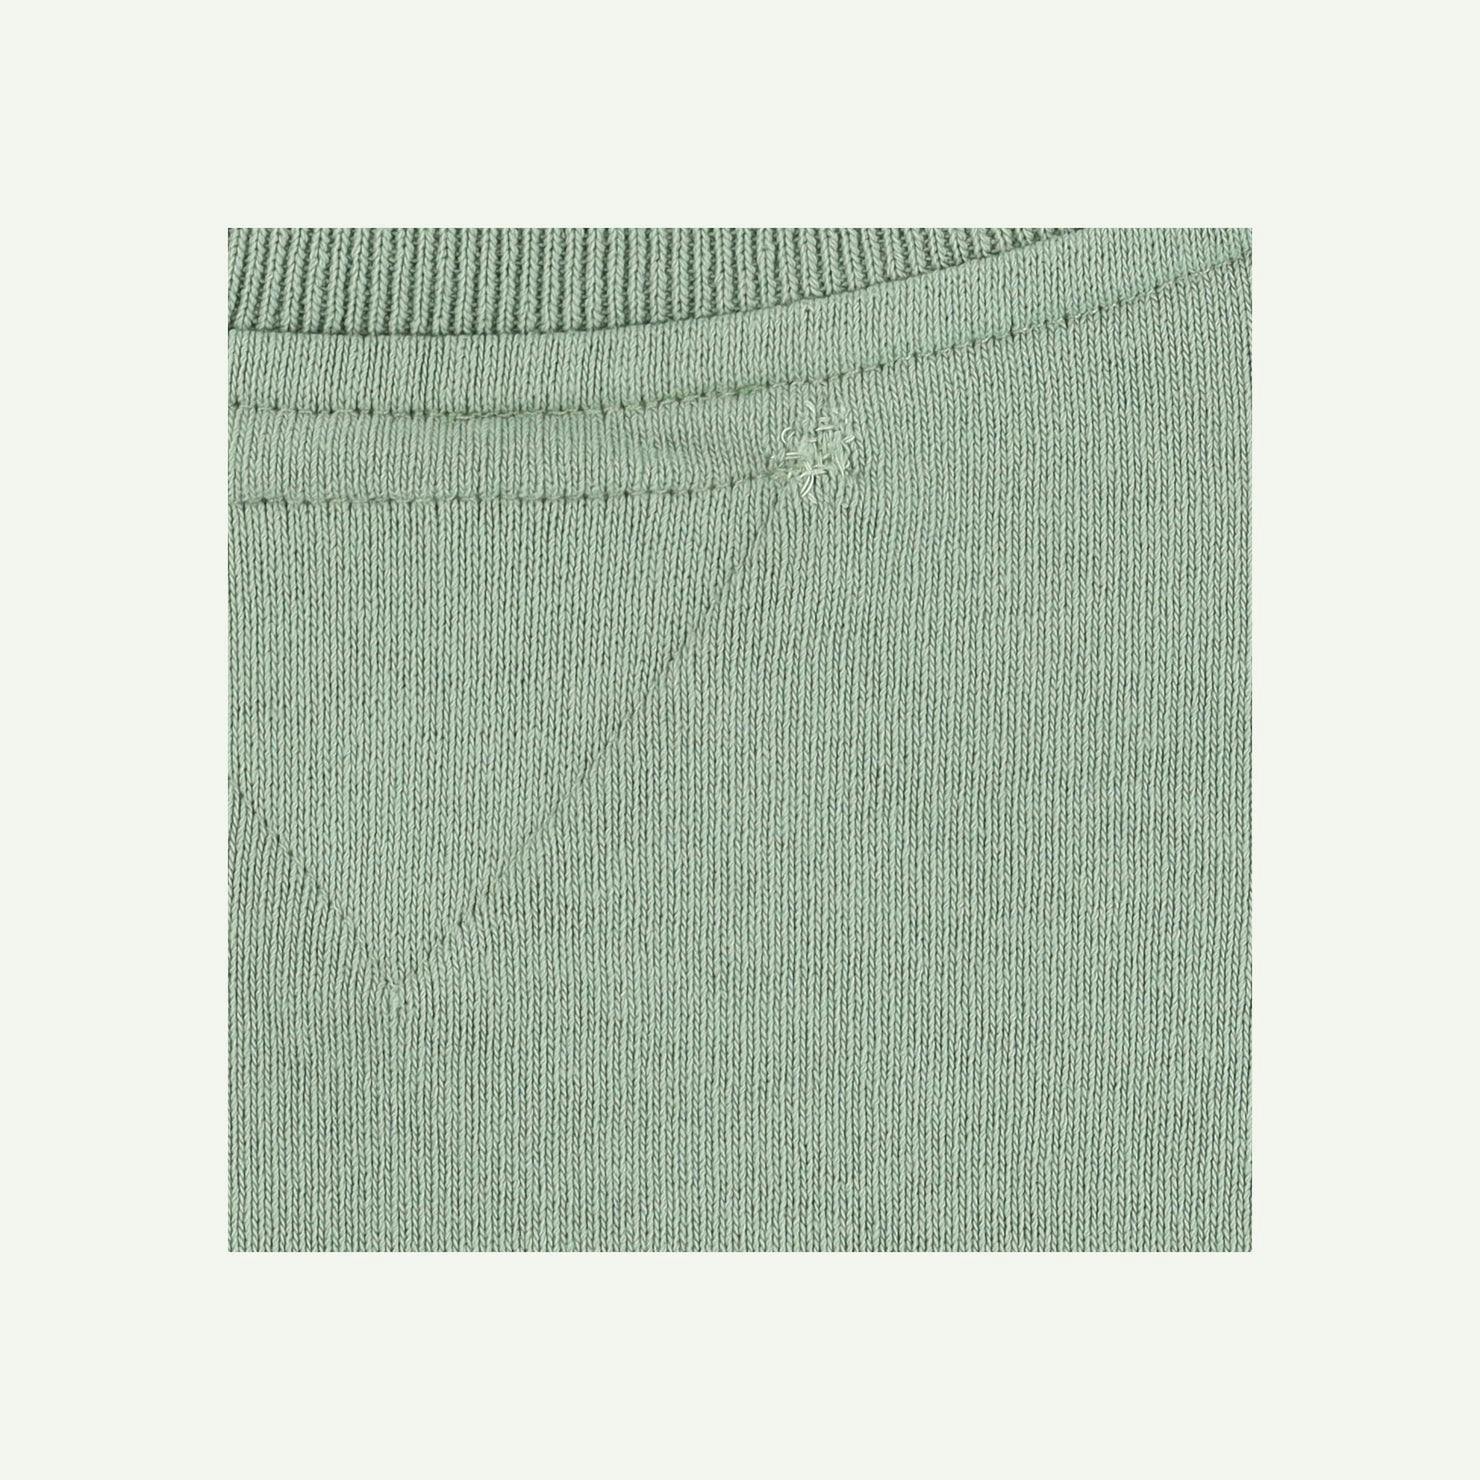 Finisterre Repaired Green T-Shirt